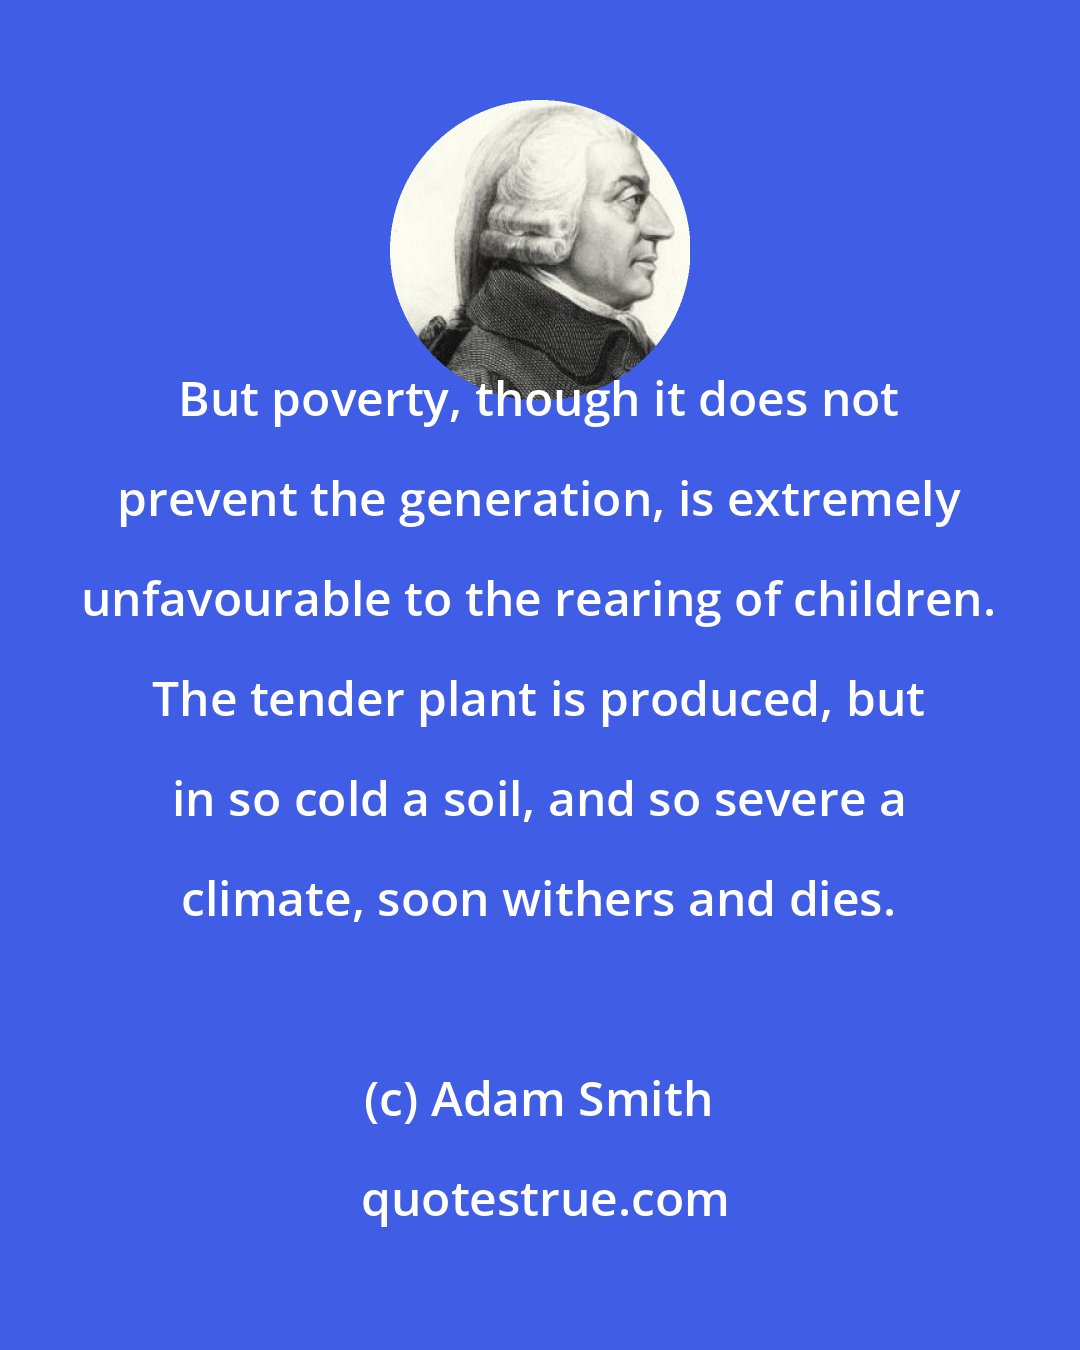 Adam Smith: But poverty, though it does not prevent the generation, is extremely unfavourable to the rearing of children. The tender plant is produced, but in so cold a soil, and so severe a climate, soon withers and dies.